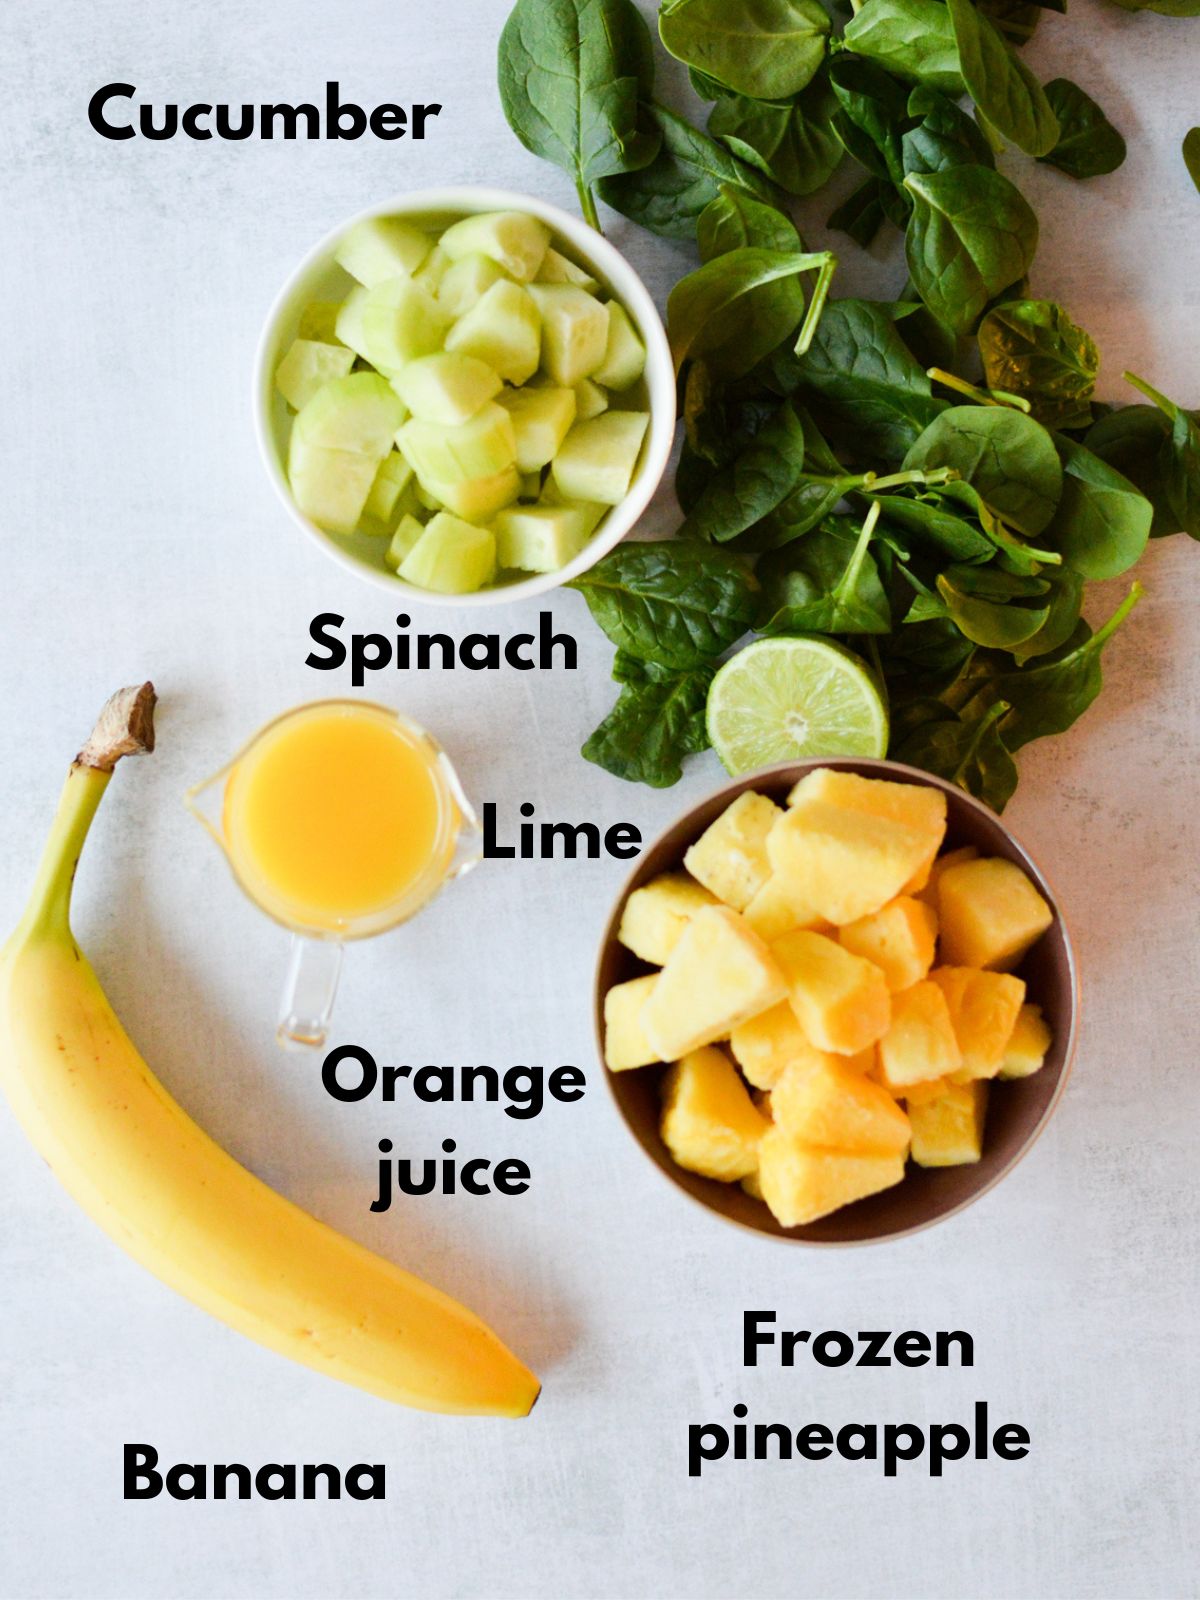 Ingredients for spinach cucumber smoothie.